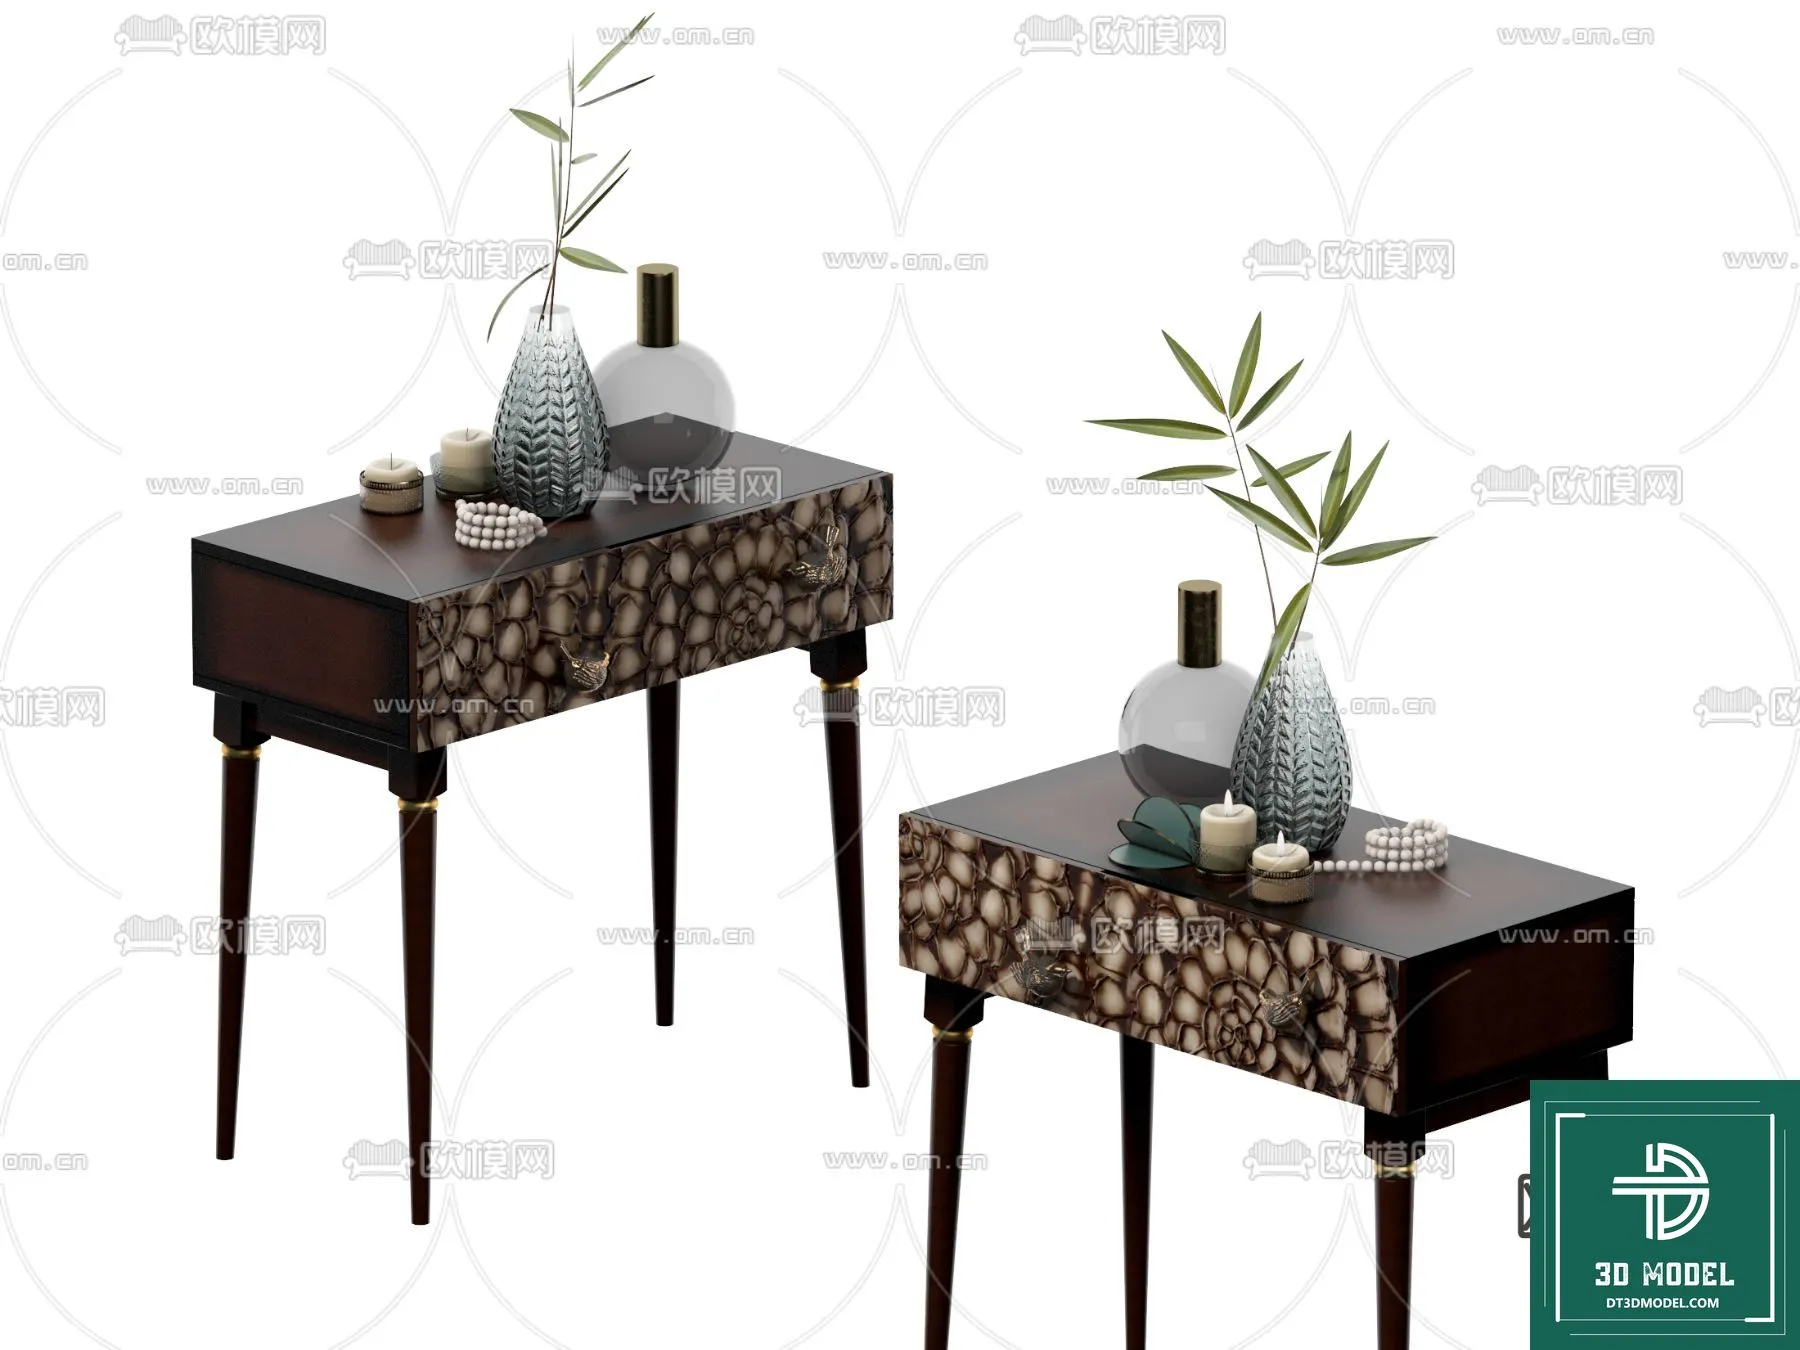 INDOCHINE STYLE – 3D MODELS – 687